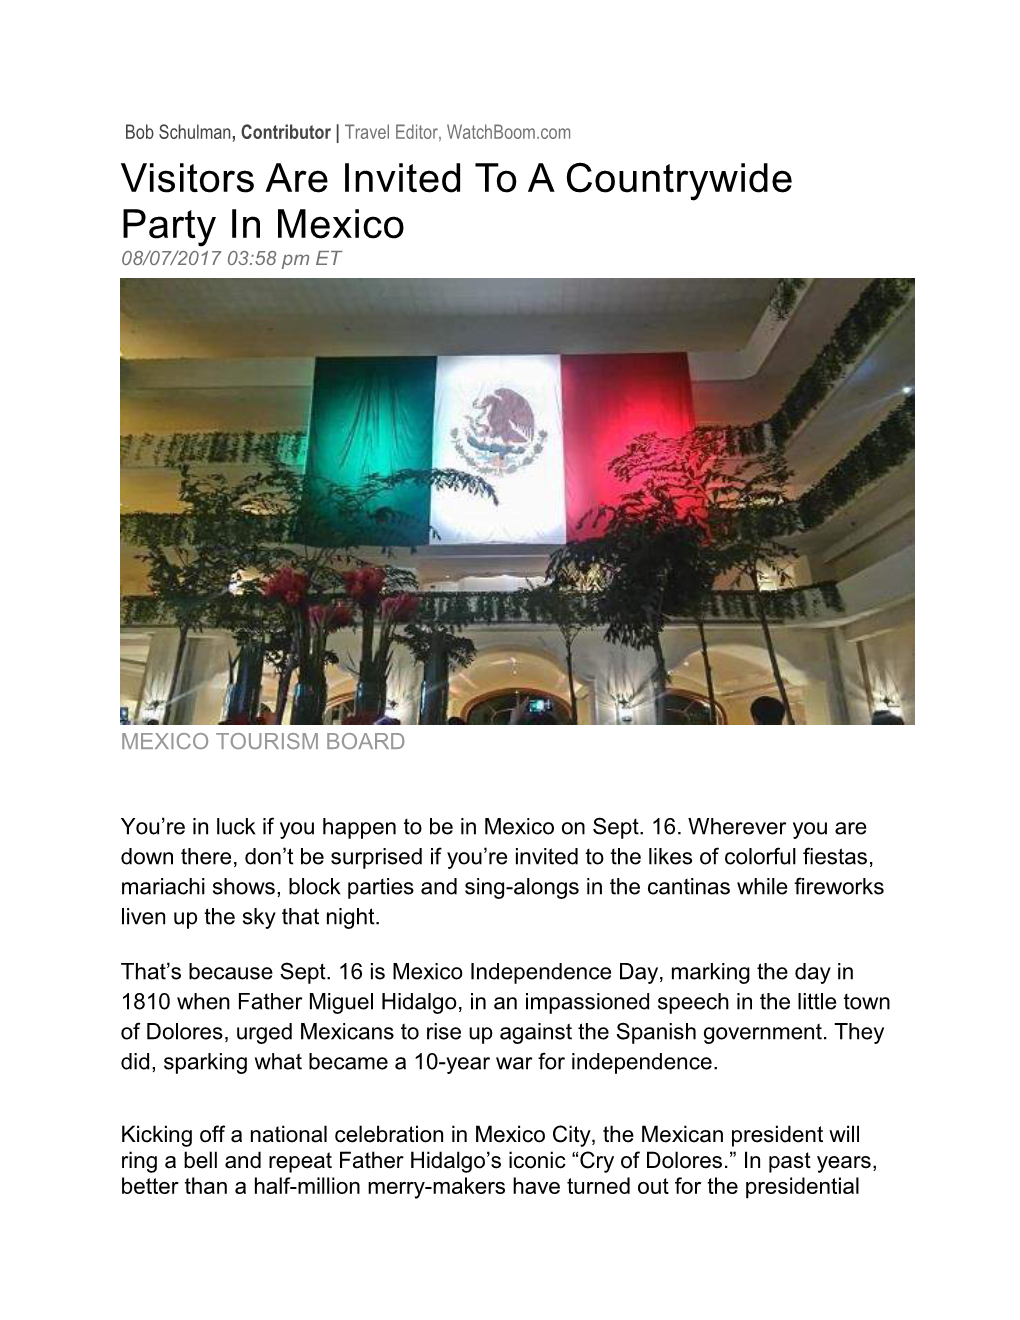 Visitors Are Invited to a Countrywide Party in Mexico 08/07/2017 03:58 Pm ET